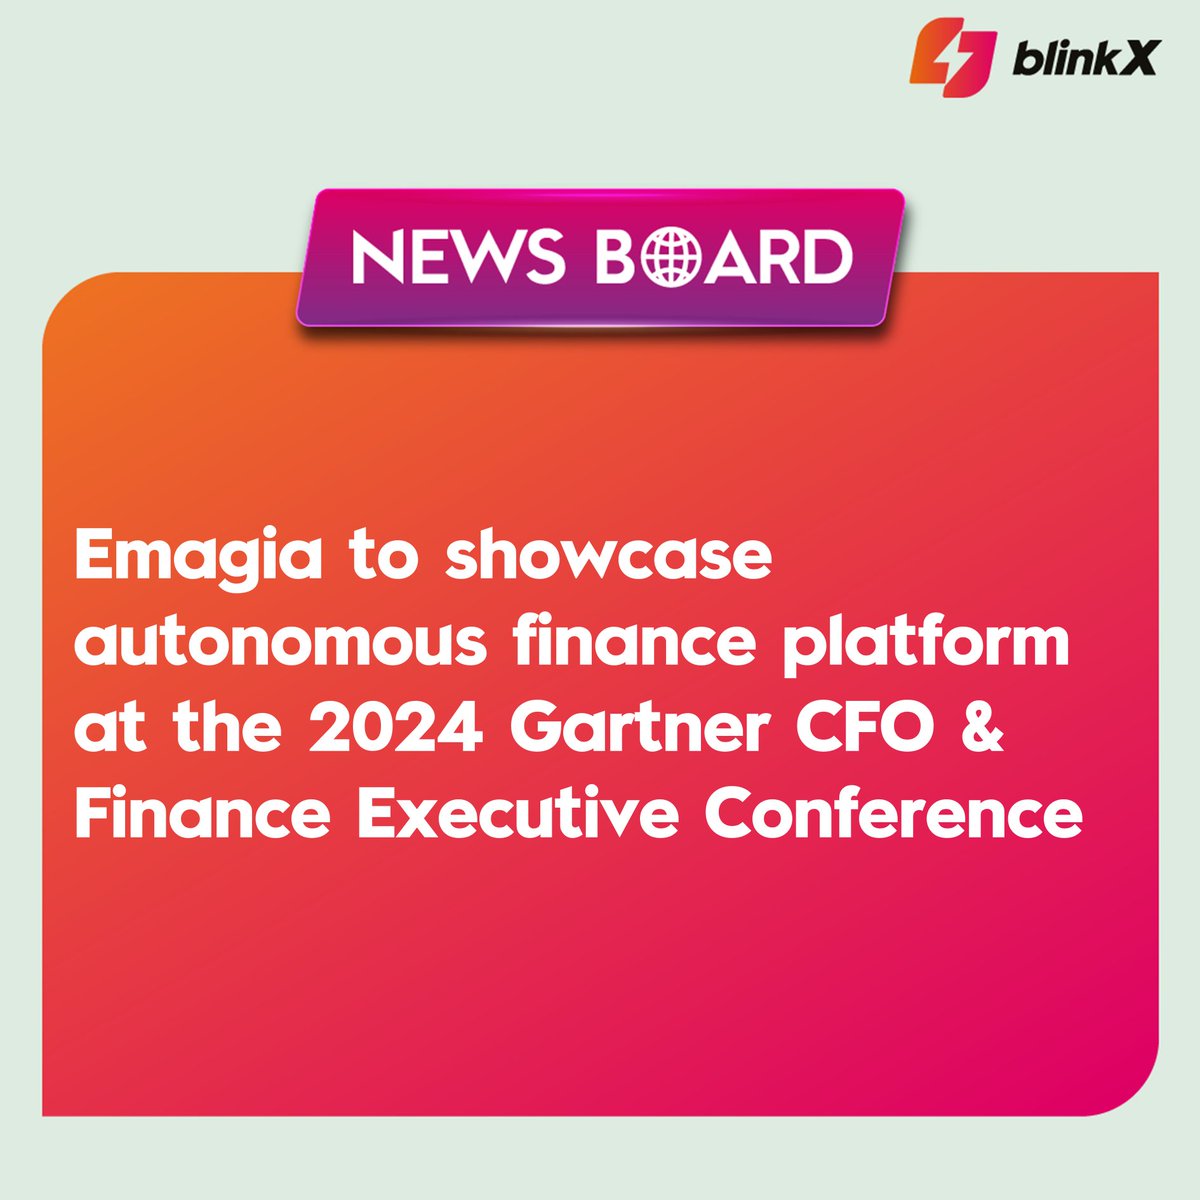 Gartner expects more than 2,000 financial leaders to attend in National Harbor for the event.

#Emagia #Conference #news #marketupdates #stocks #stockinfocus #StocksToBuy #federal #bseindia #nseindia #GIFTNIFTY #sensex #markets #stockmarket #investor #research #MadeForTheMarket